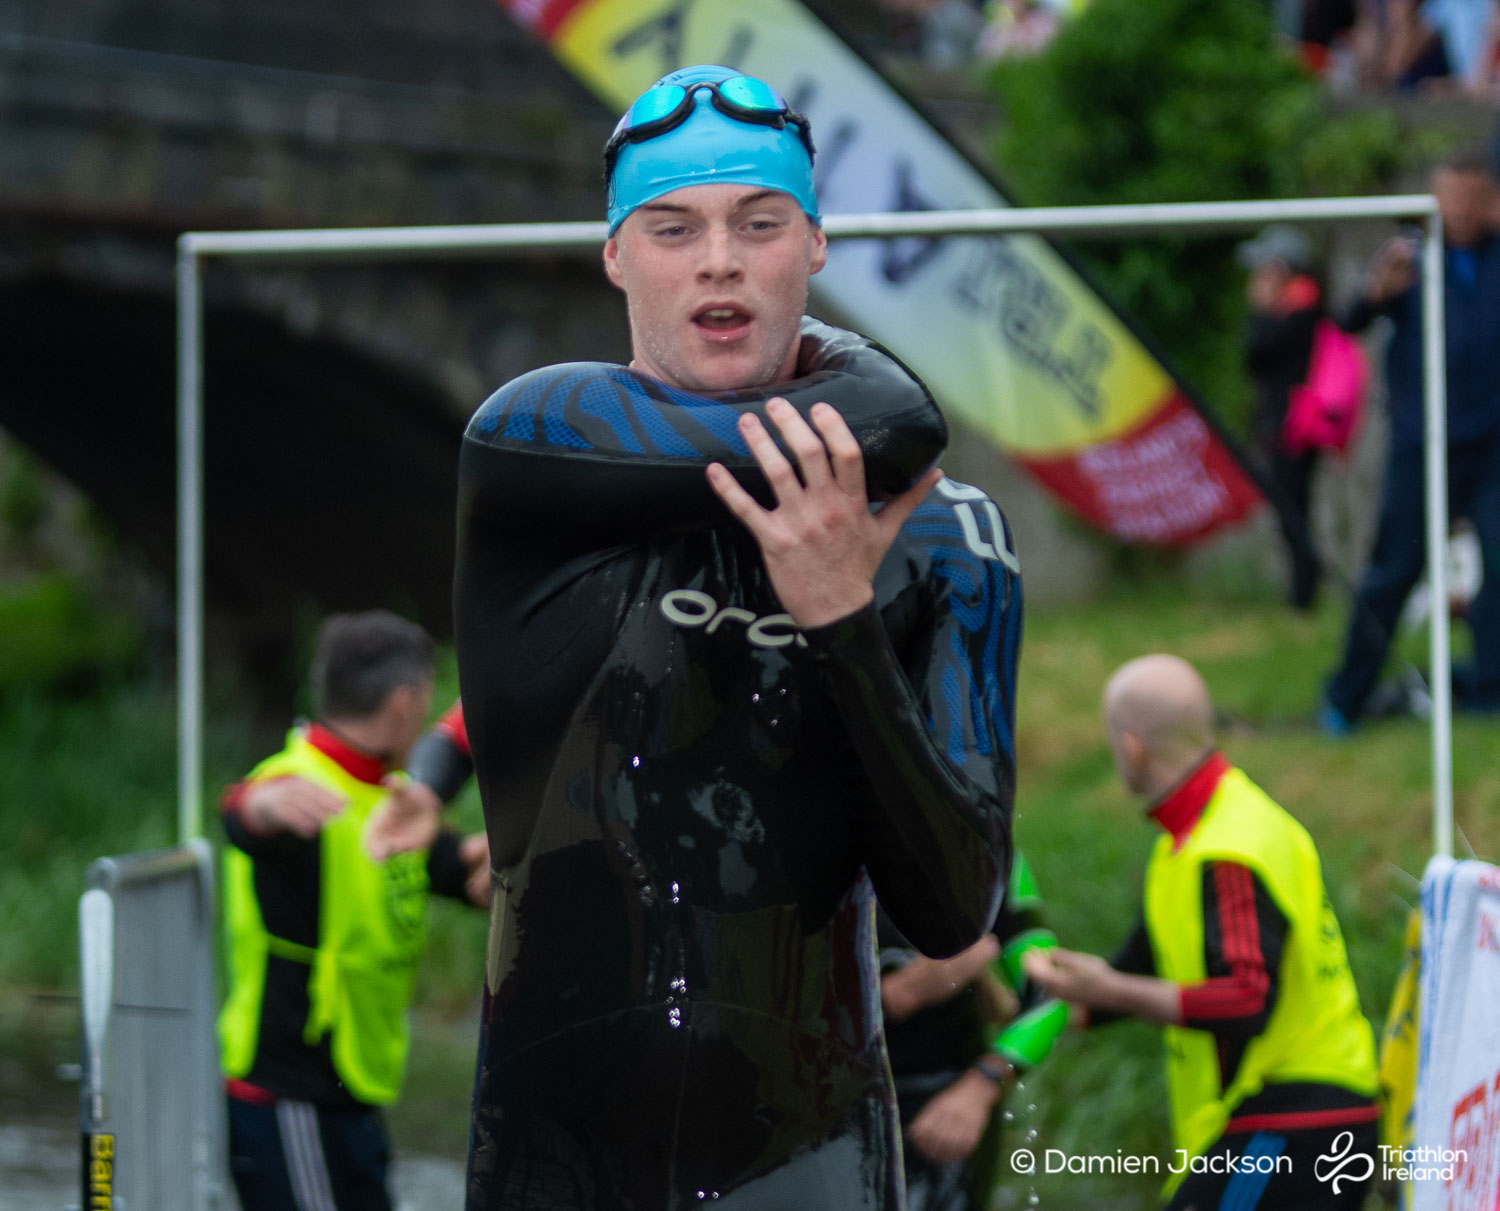 Athy_2018 (74 of 526) - TriAthy - XII Edition - 2nd June 2018